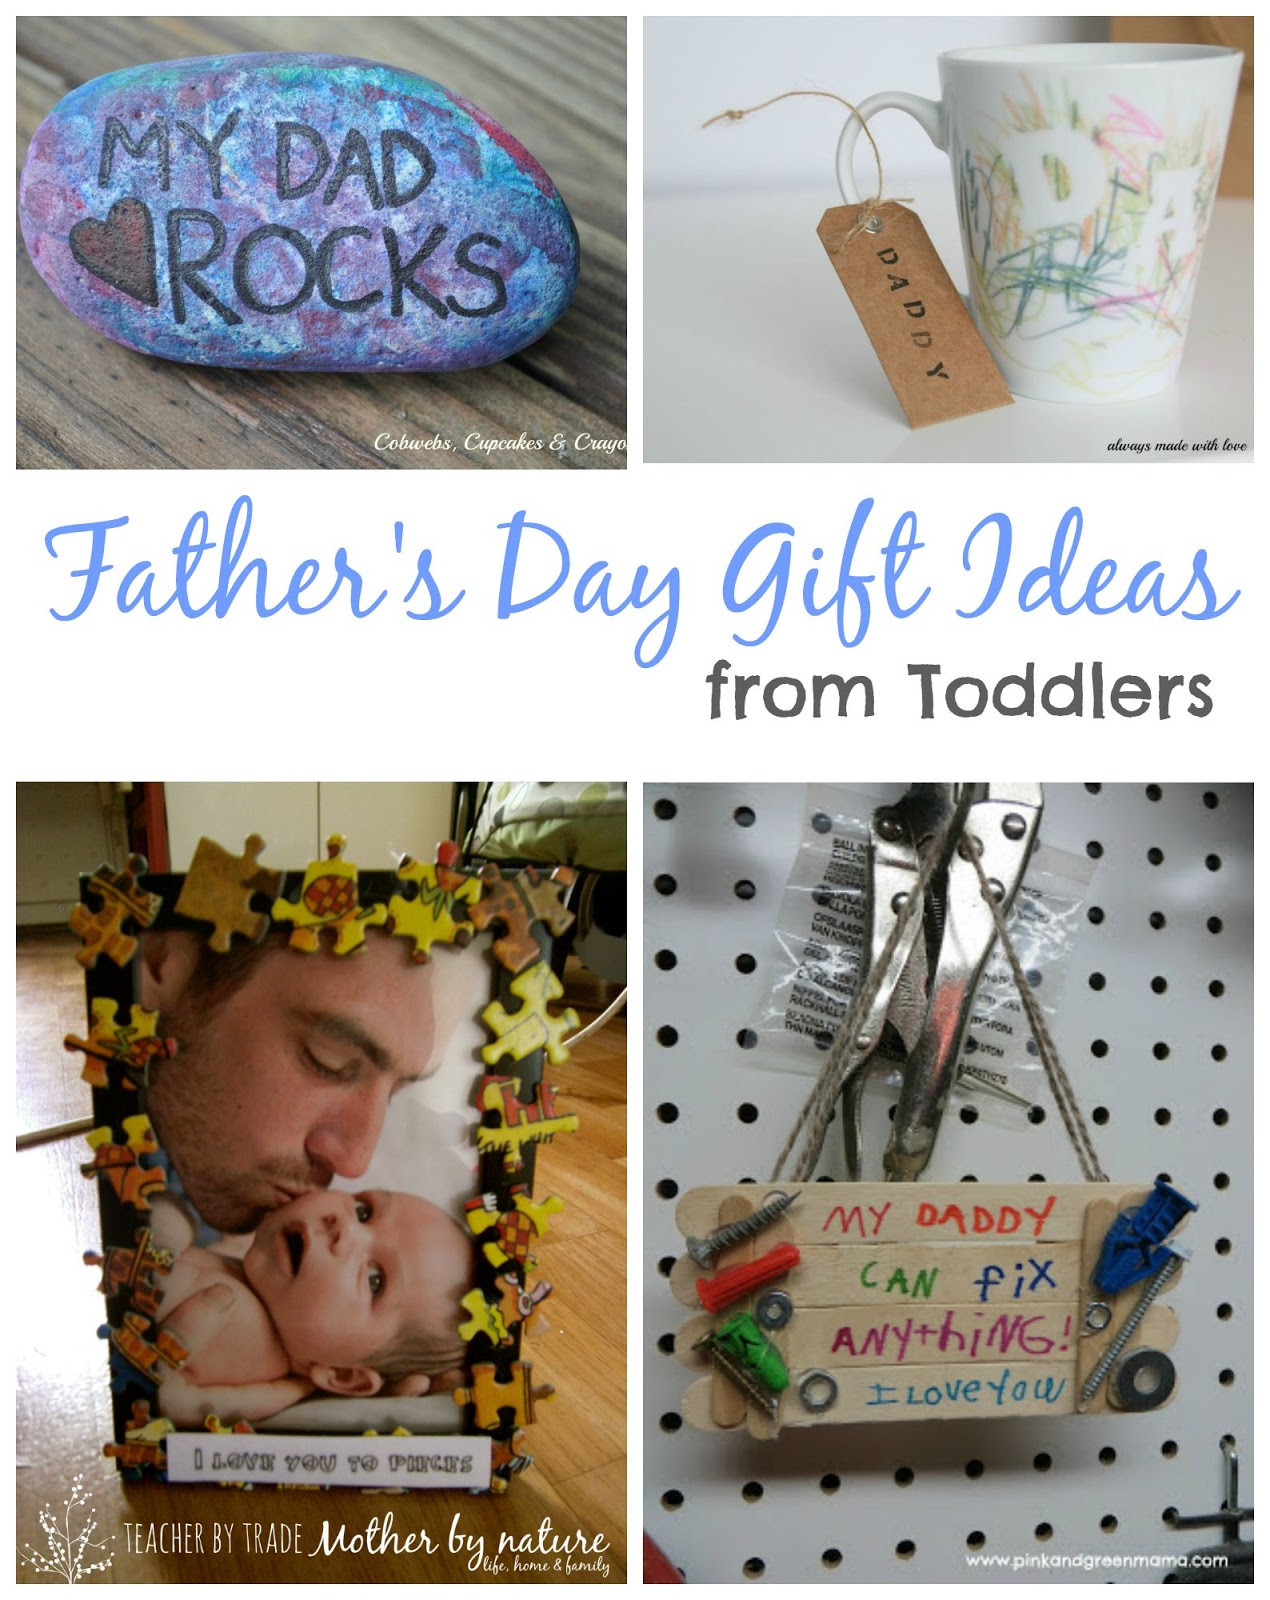 Toddler Fathers Day Gift
 Father s Day Gift Ideas from Toddlers Teacher by trade